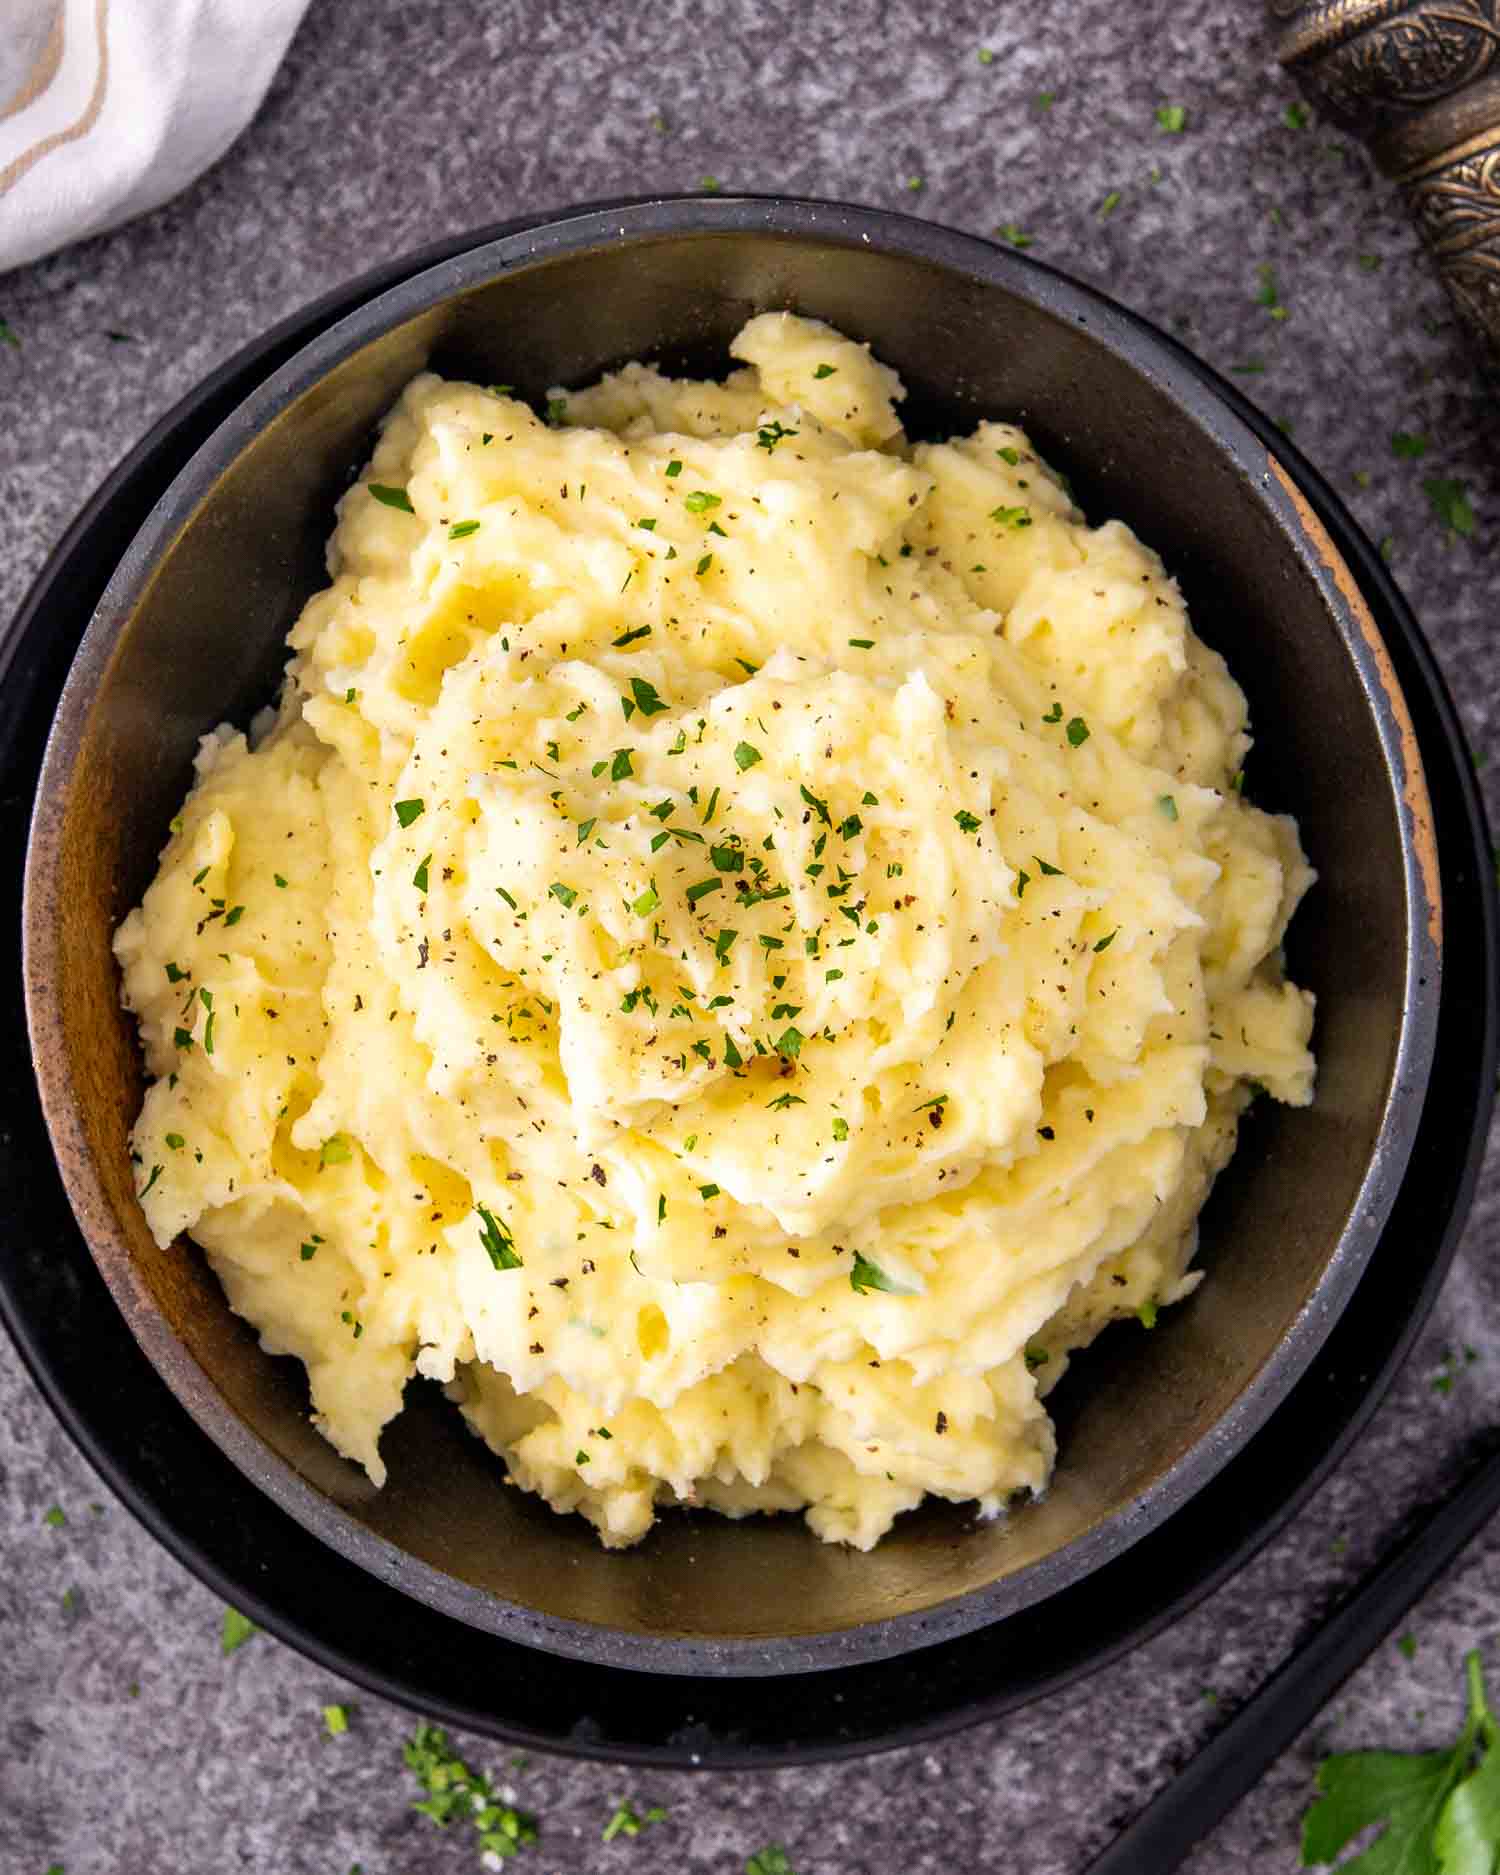 a black bowl loaded with freshly made mashed potatoes garnished with a bit of parsley.